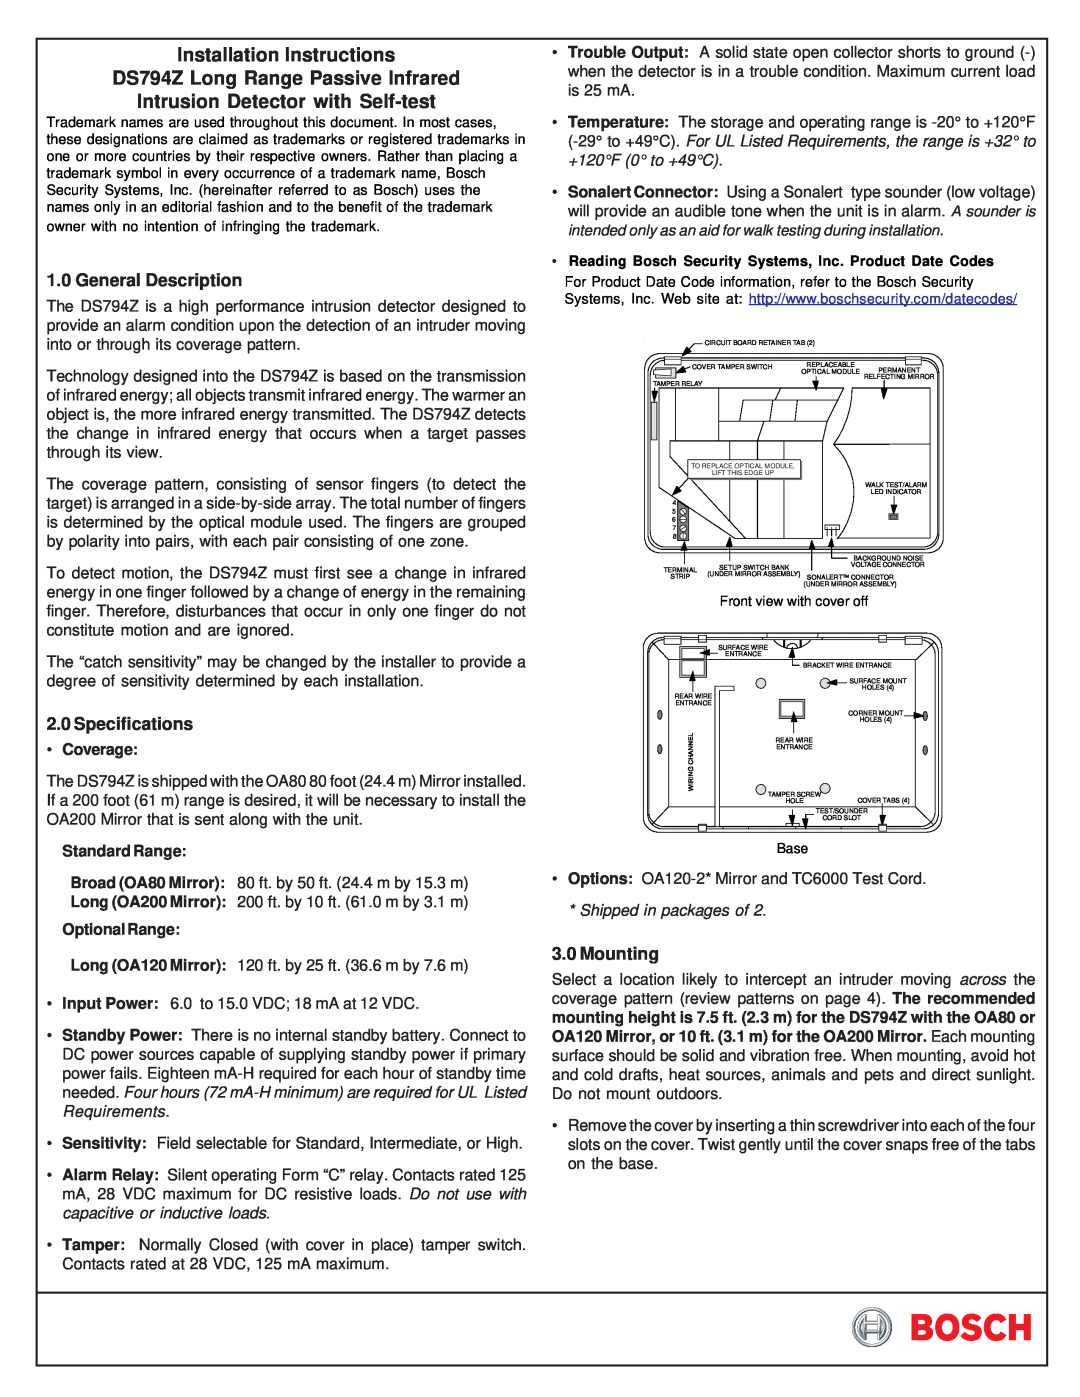 Bosch Appliances DS794Z installation instructions General Description, 2.0Specifications, Mounting, Coverage 